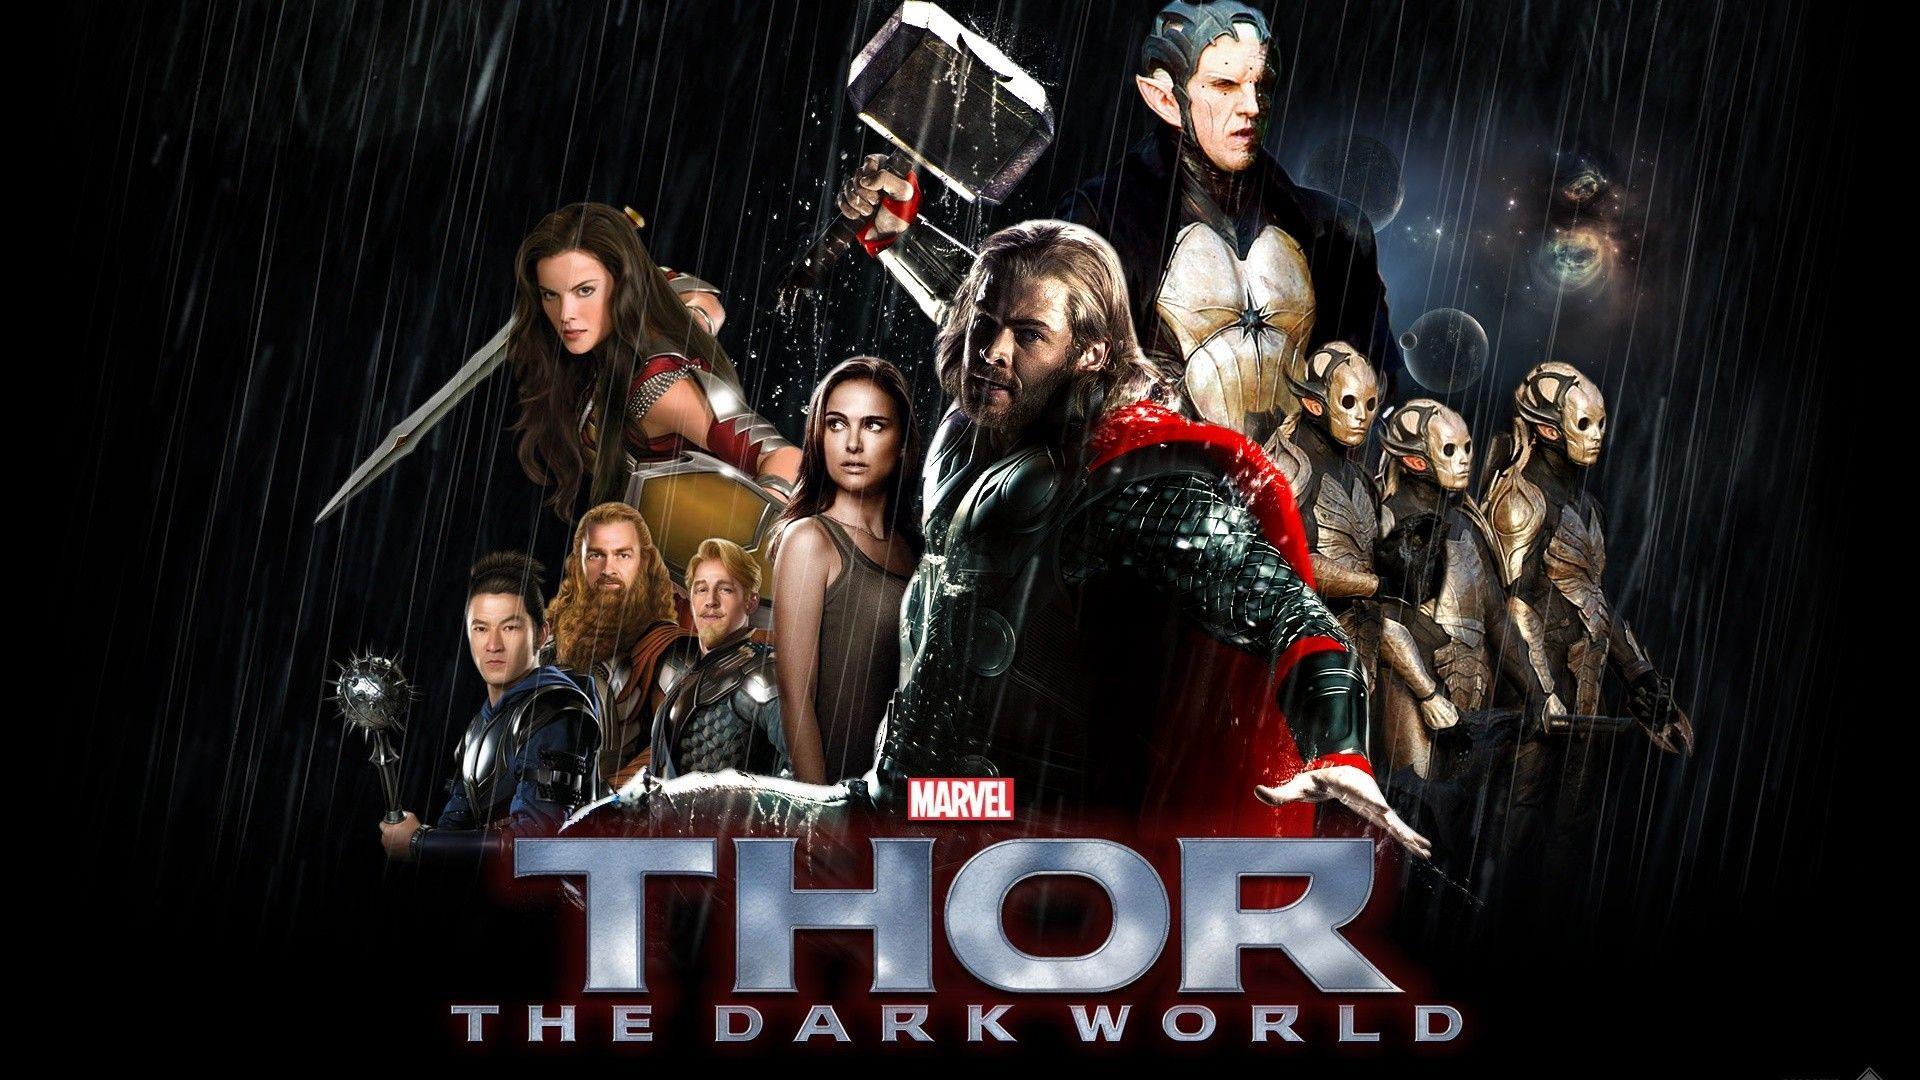 Find out: Thor 2 The Dark World wallpaper